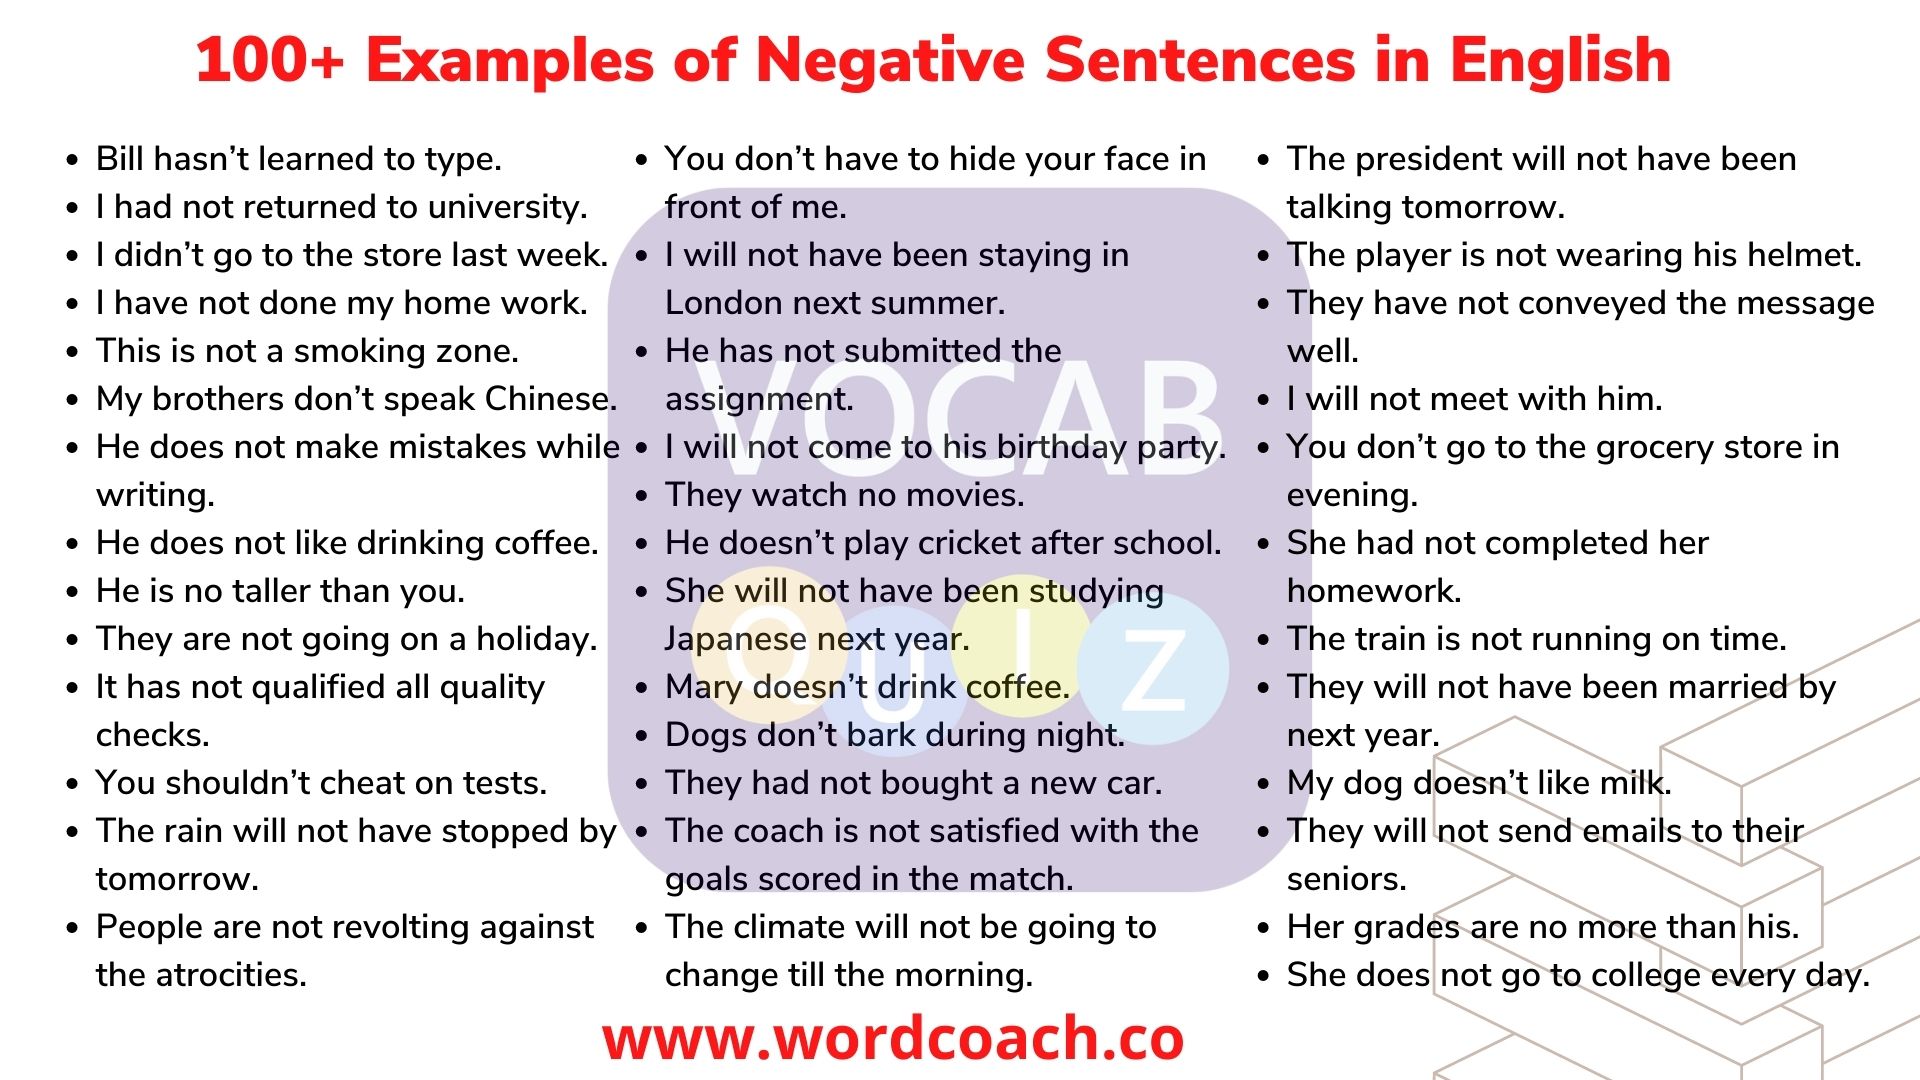 100+ Examples of Negative Sentences in English - wordcoach.co